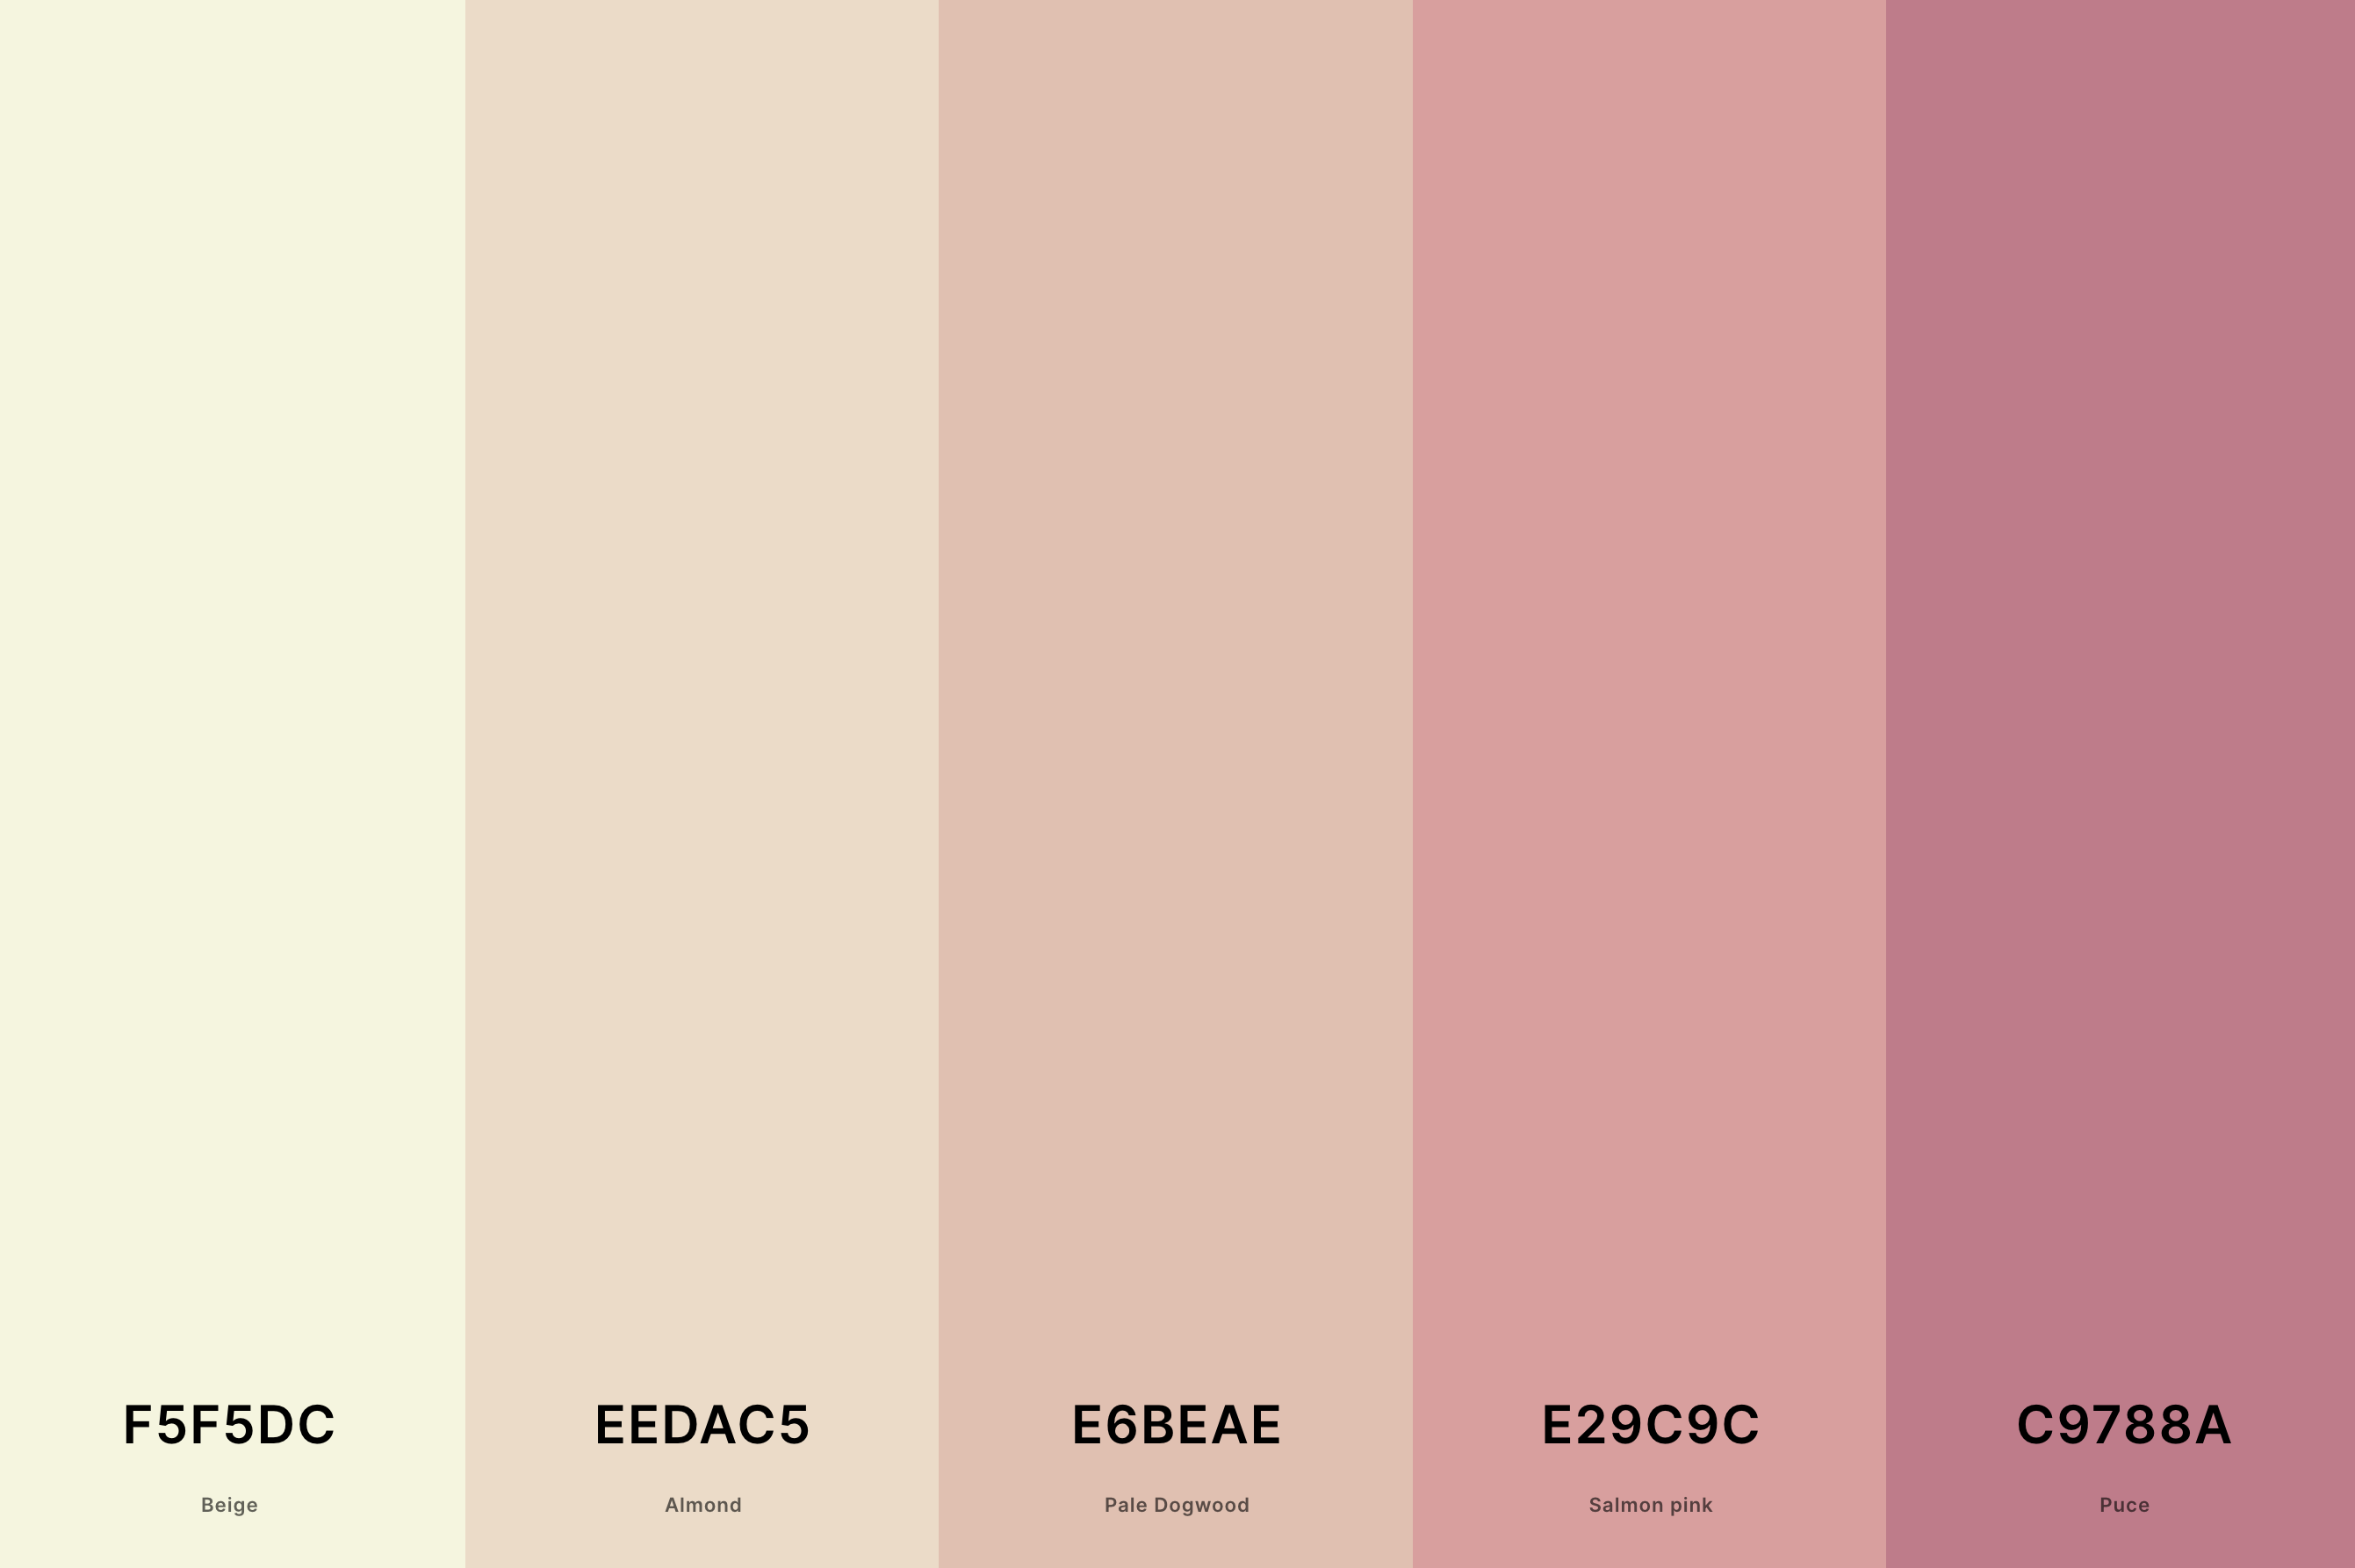 13. Beige And Pink Color Palette Color Palette with Beige (Hex #F5F5DC) + Almond (Hex #EEDAC5) + Pale Dogwood (Hex #E6BEAE) + Salmon Pink (Hex #E29C9C) + Puce (Hex #C9788A) Color Palette with Hex Codes